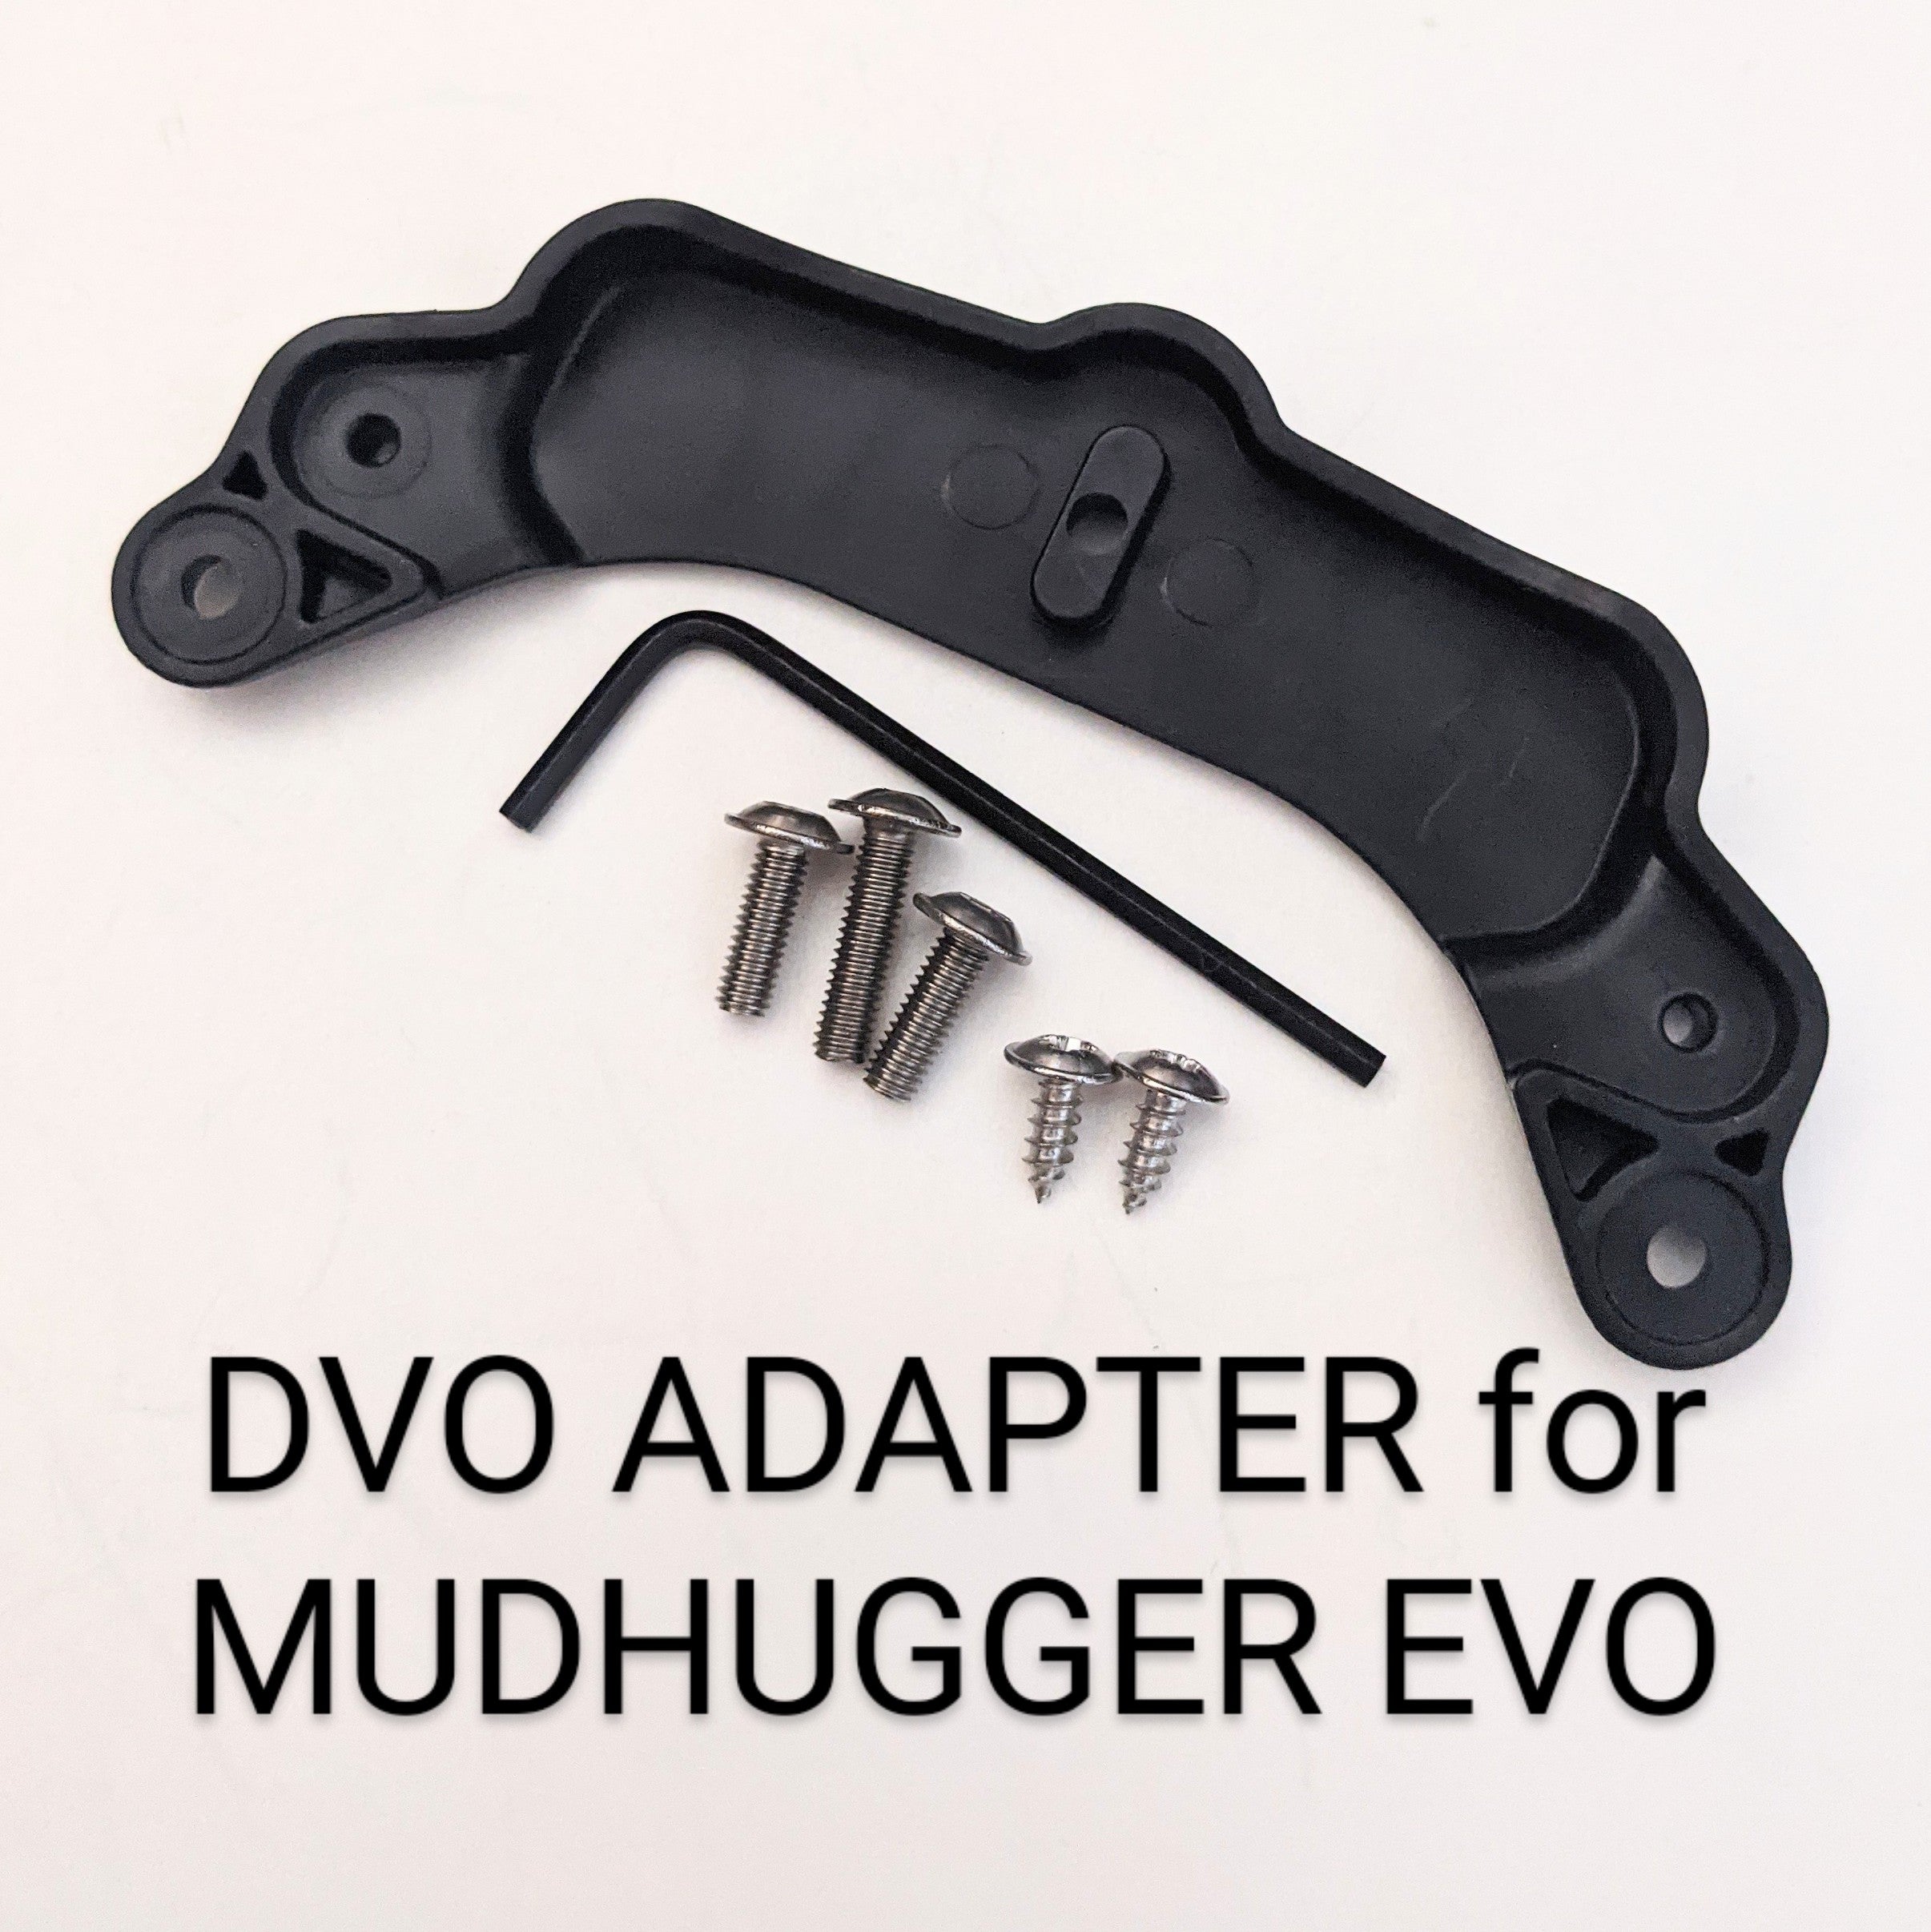 SHORTY EVO Bolt-On Mudhugger default FOX fitting (OPTIONS FOR ZEB, RECON, DVO AND OHLINS SEE BELOW)